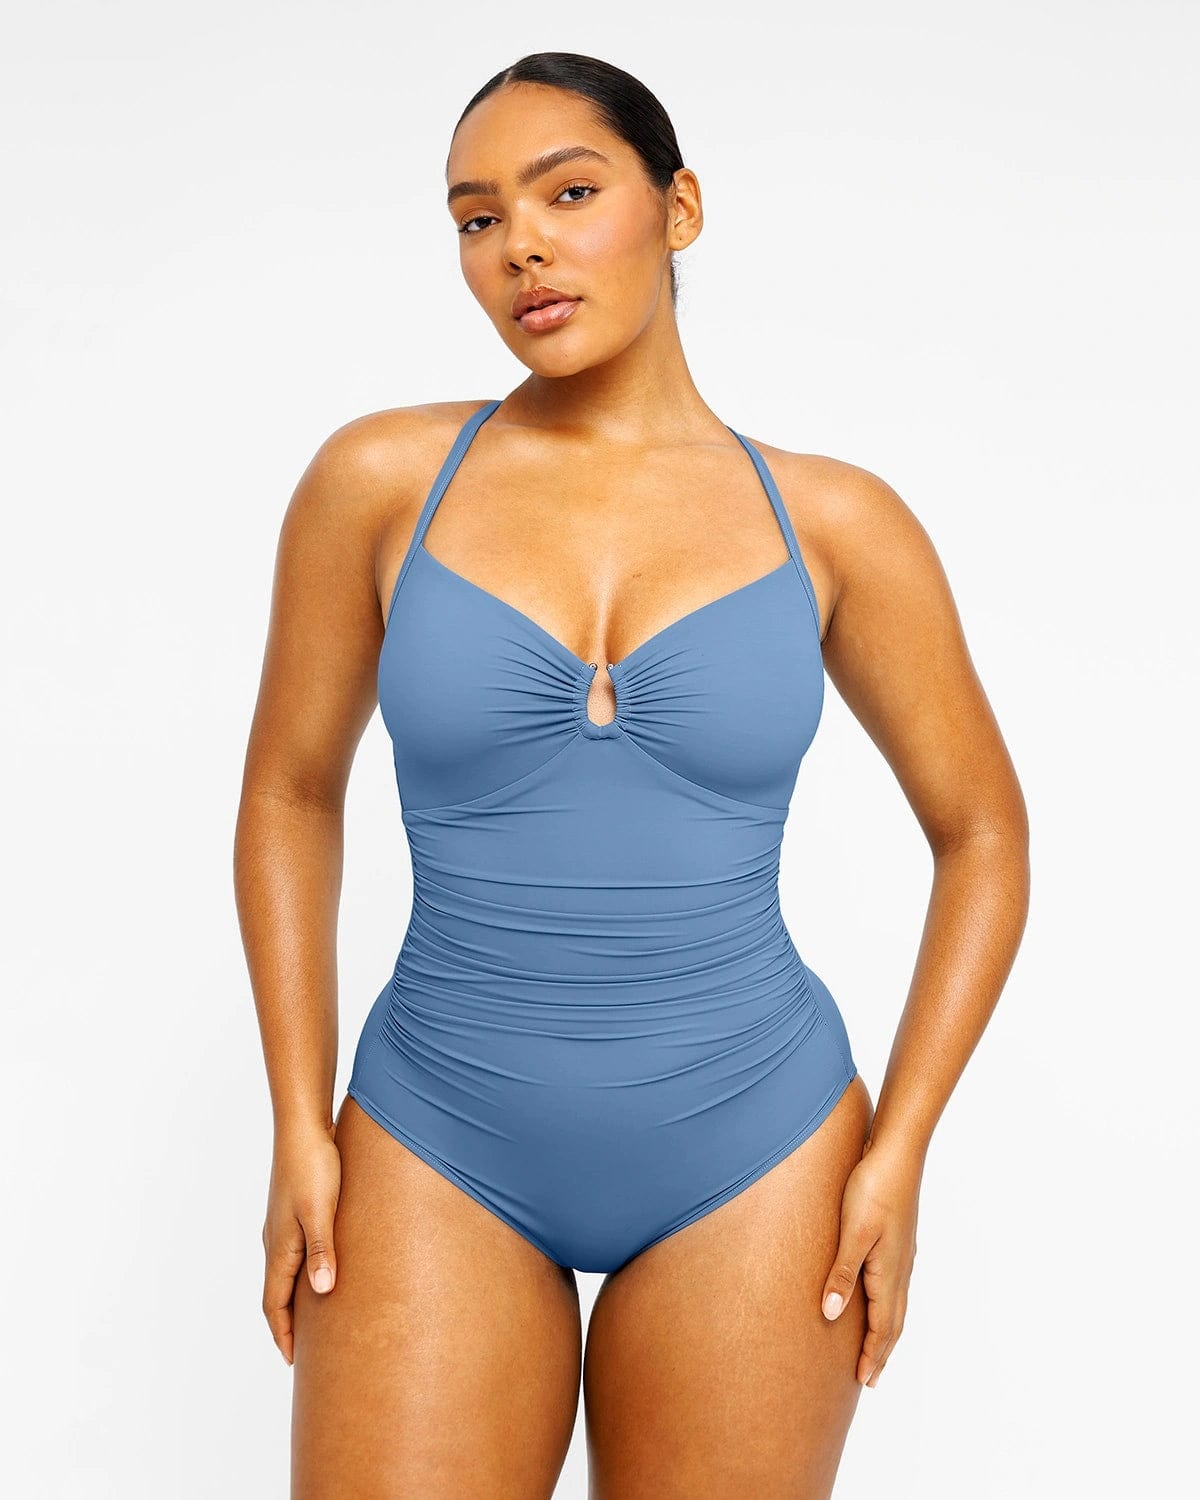 This @Shapellx swimsuit SNATCHES! It hugs in all the right places